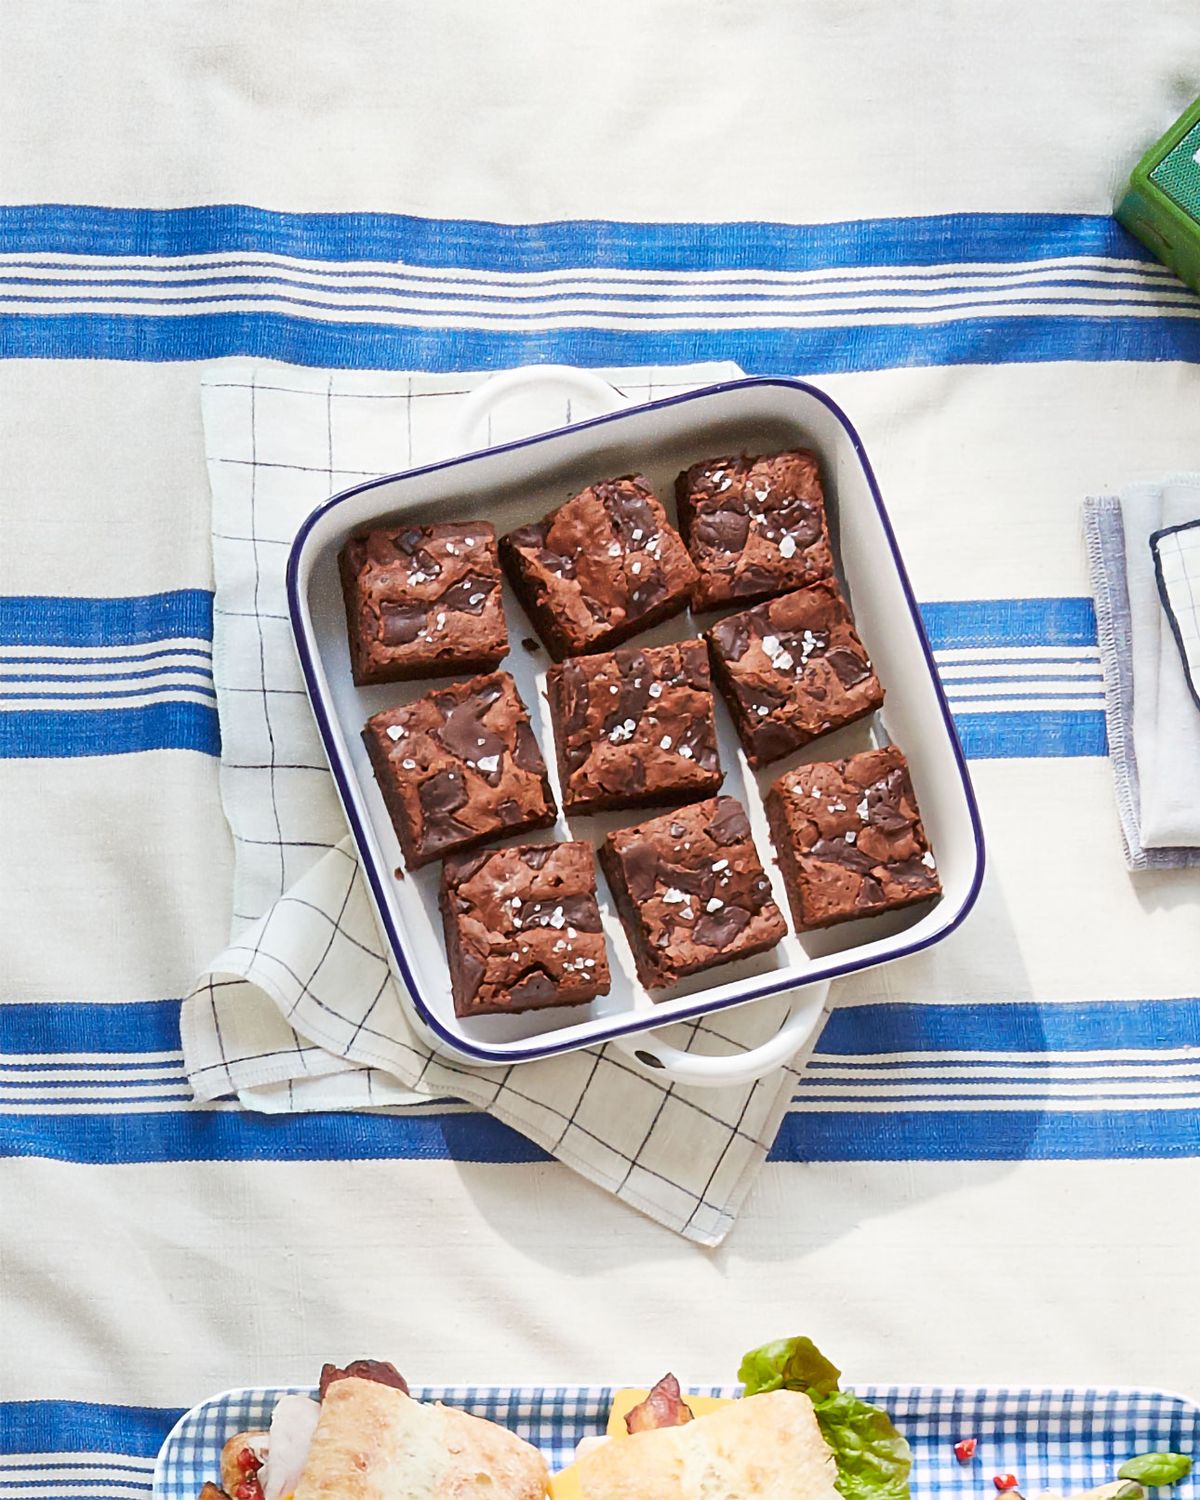 fudgy stout brownies in a tray on a picnic blanket